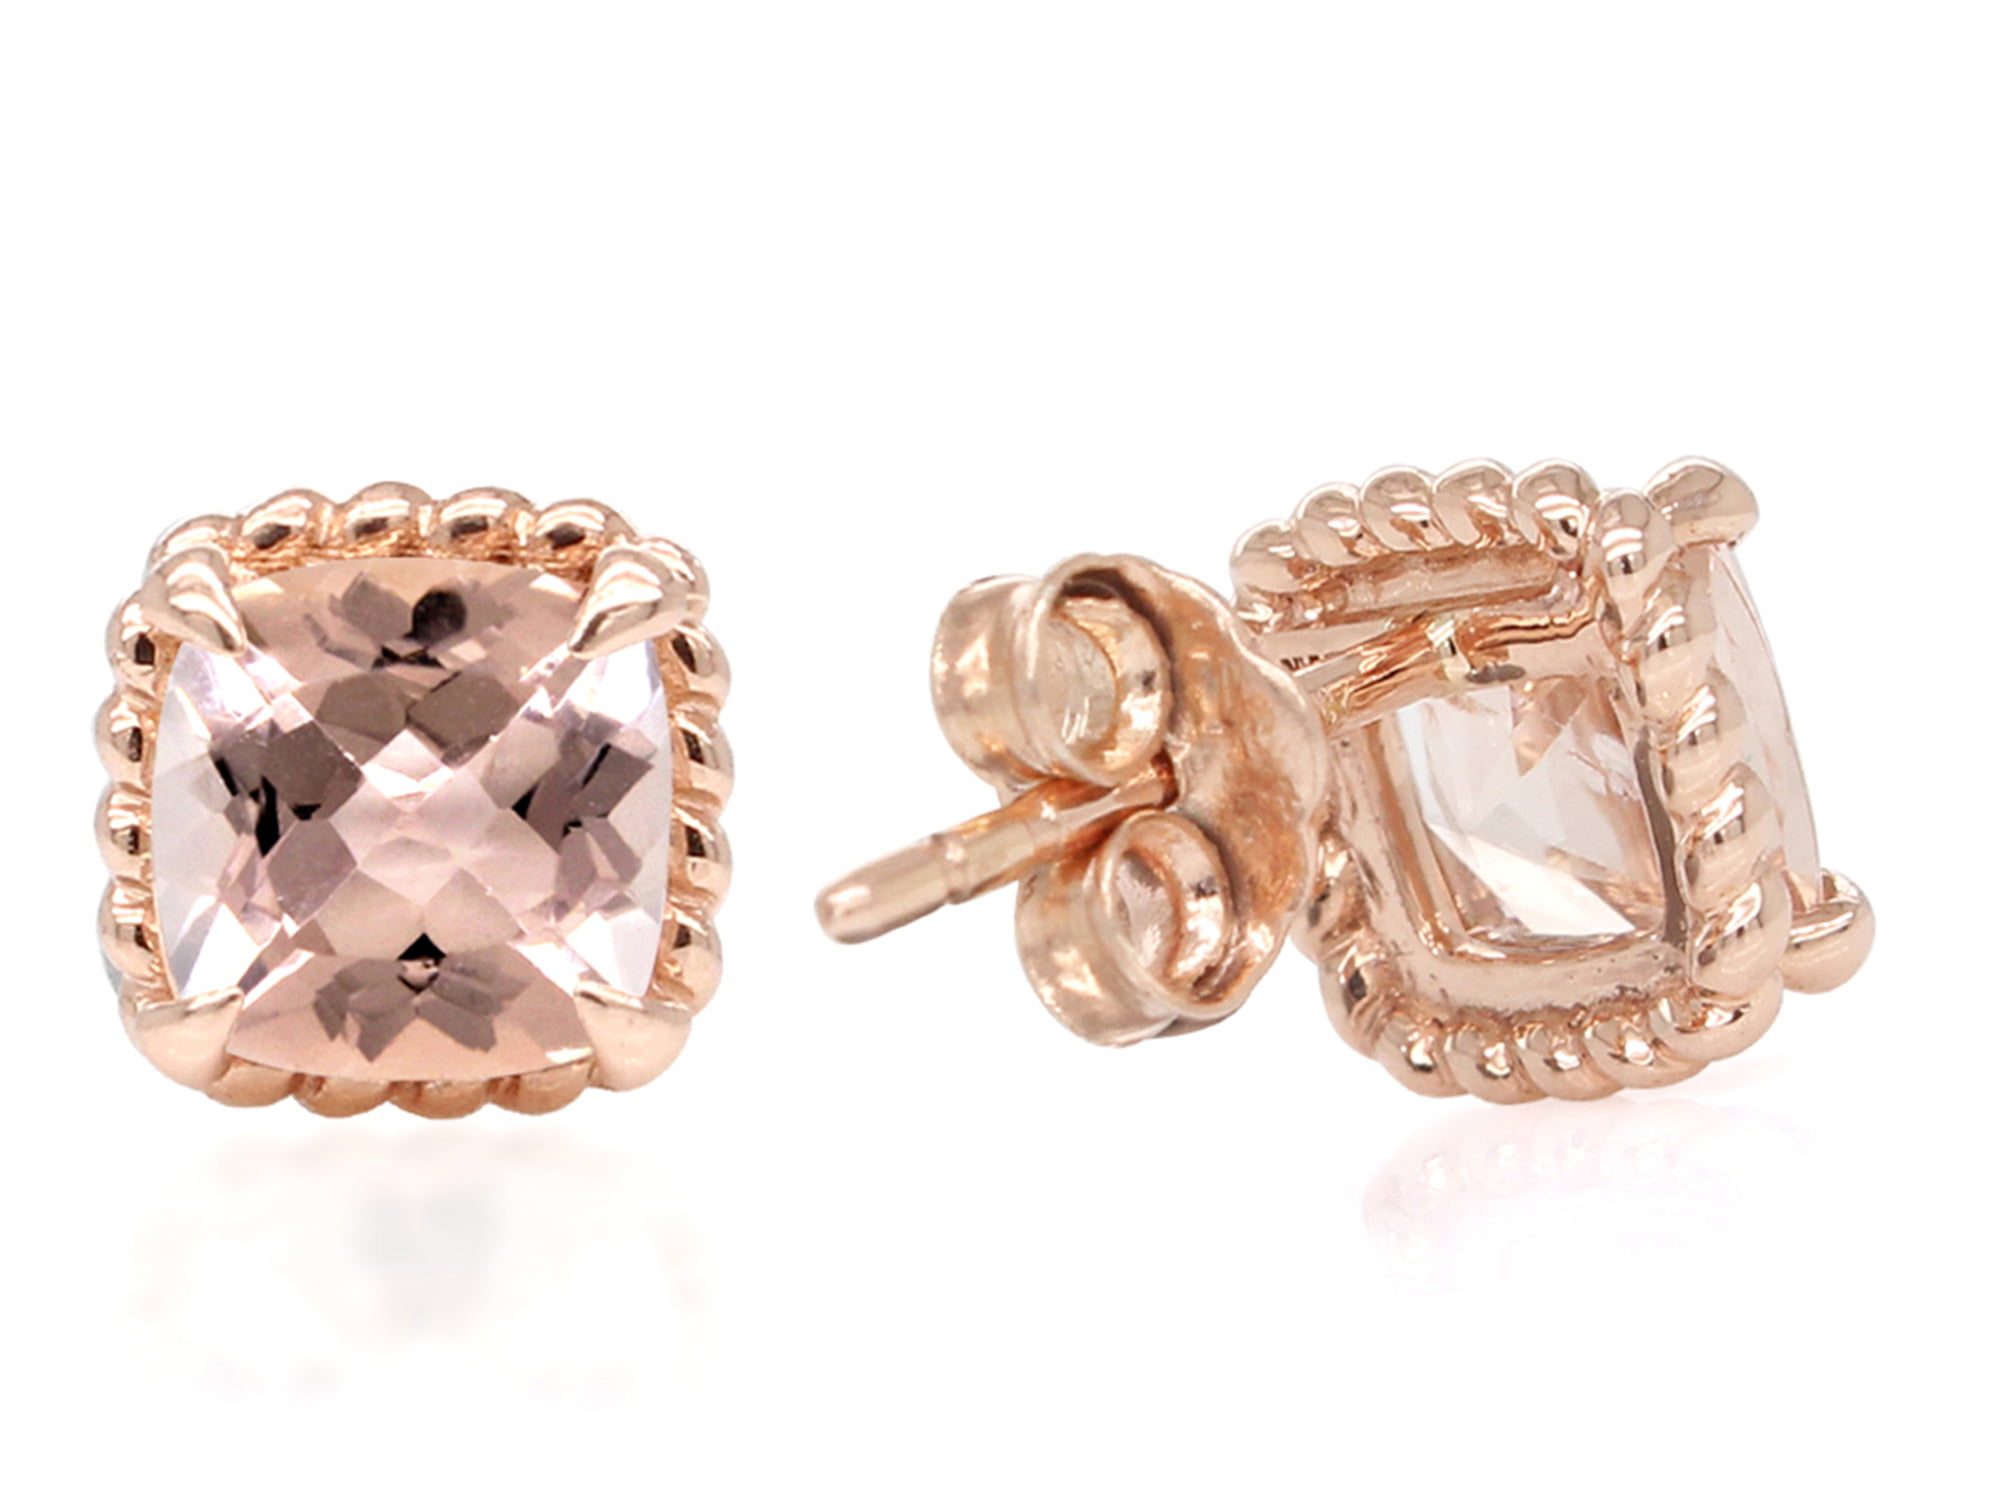 Details about   Stunning Morganite Gemstone Octagon Shape Jewelry 10k Rose Gold Earrings 